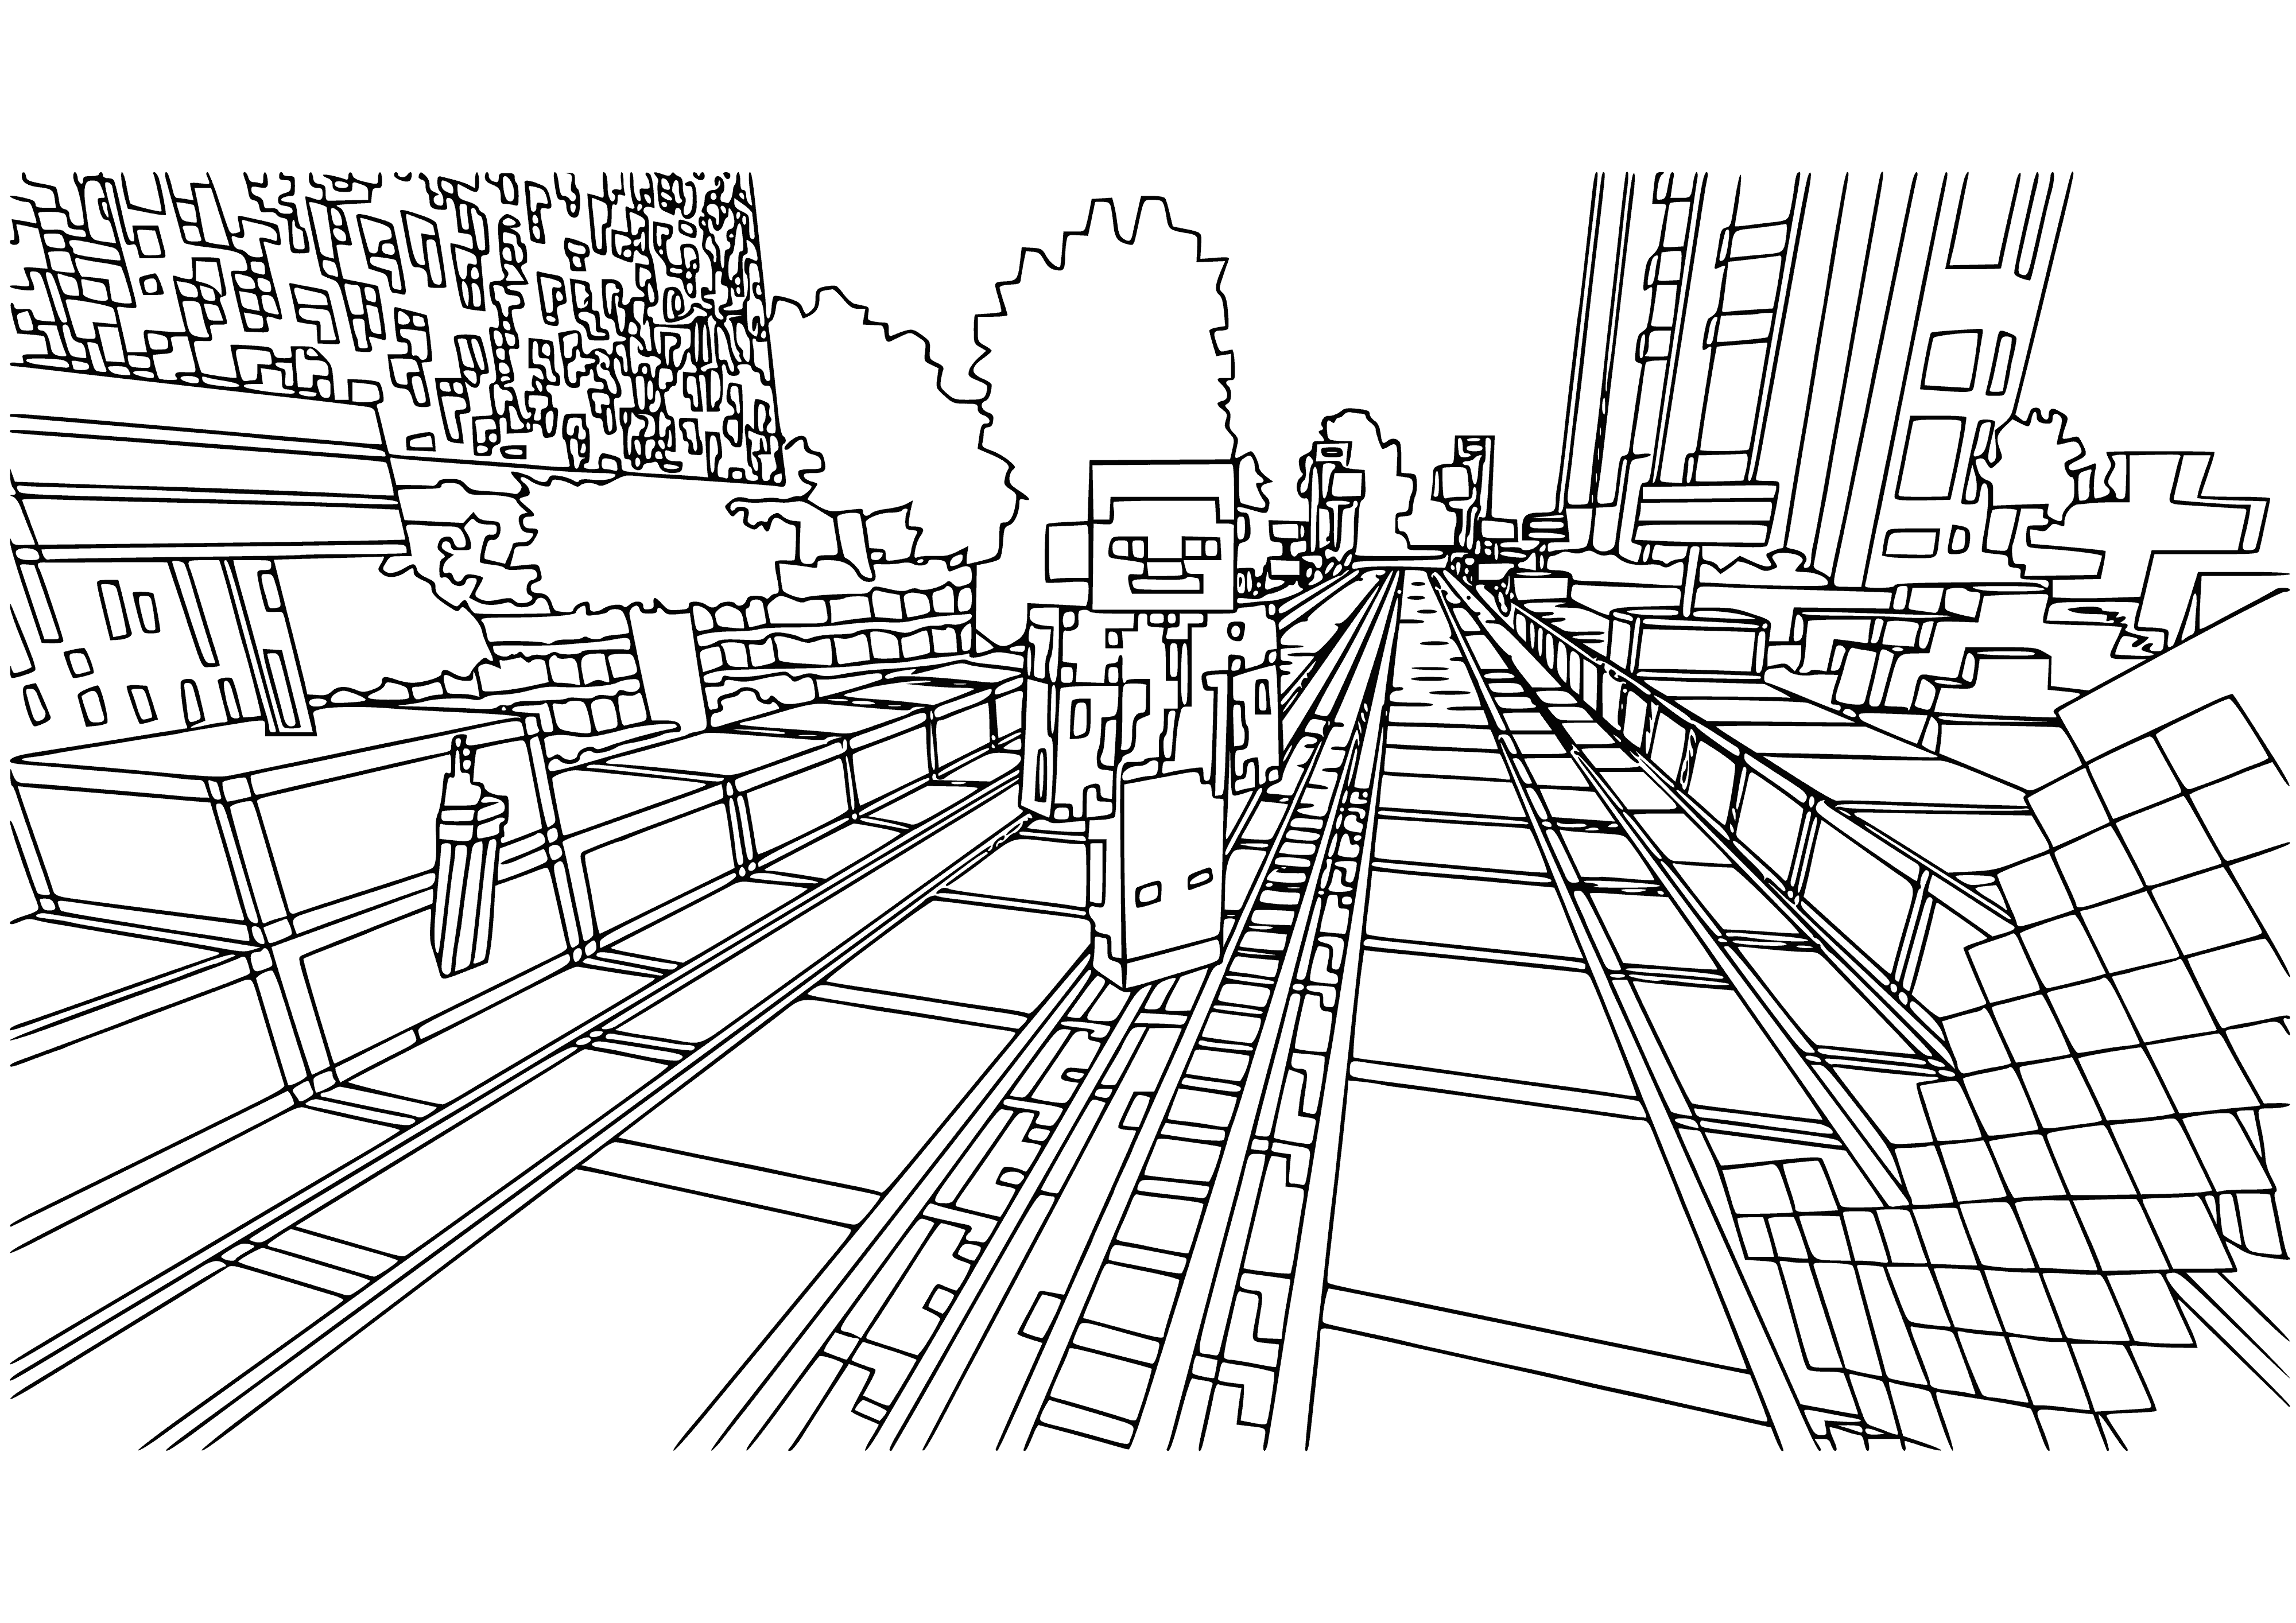 coloring page: Players work together to build a thriving city in Minecraft, with tall buildings, roads, parks, and a bustling market. Everyone works together to make it an amazing place to live!